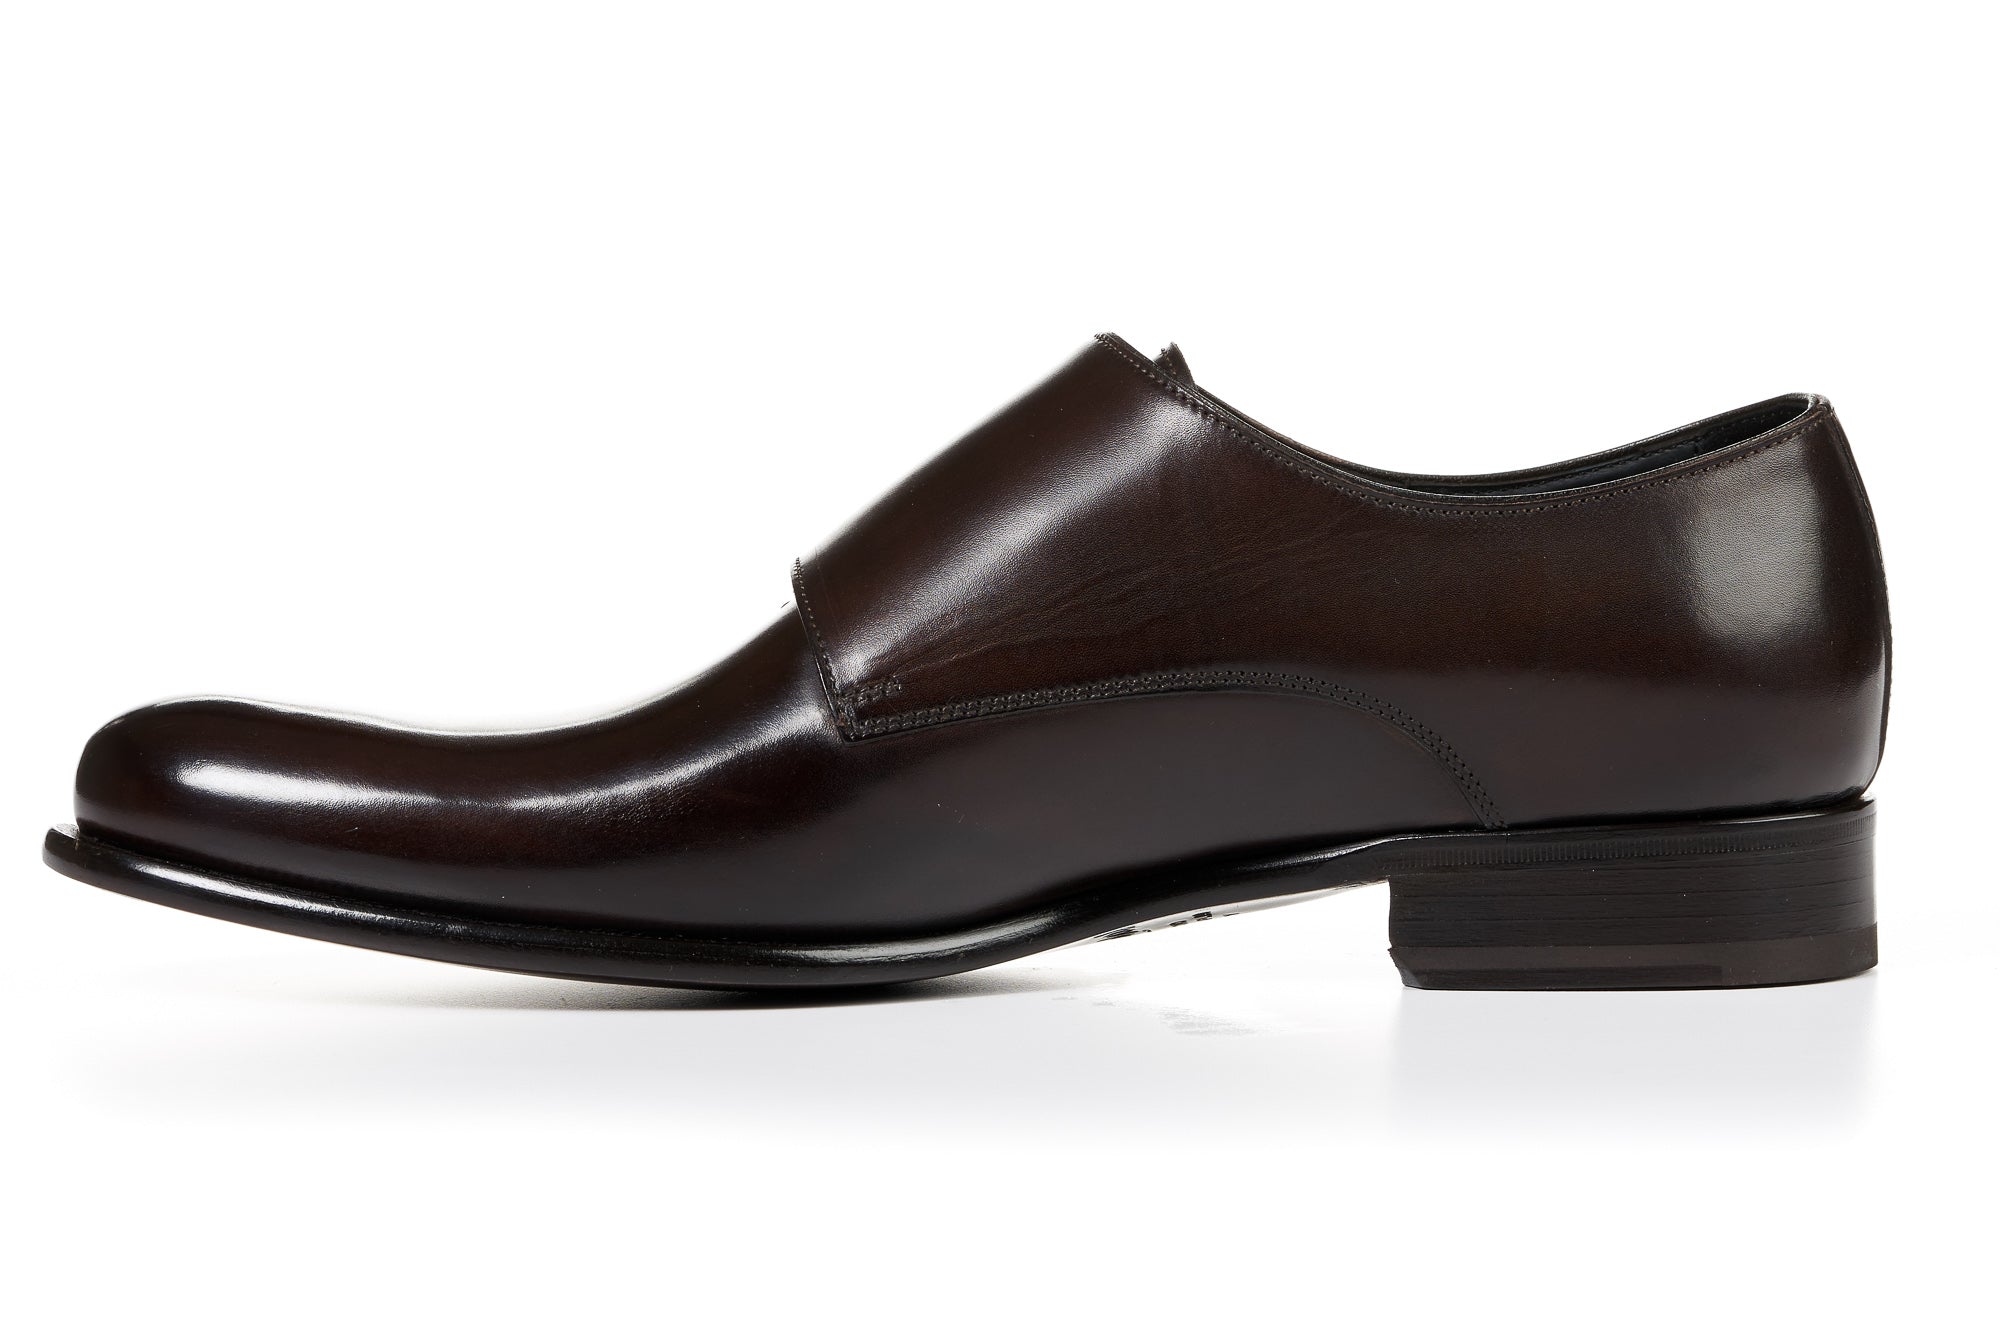 The Poitier Double Monk Strap - Chocolate